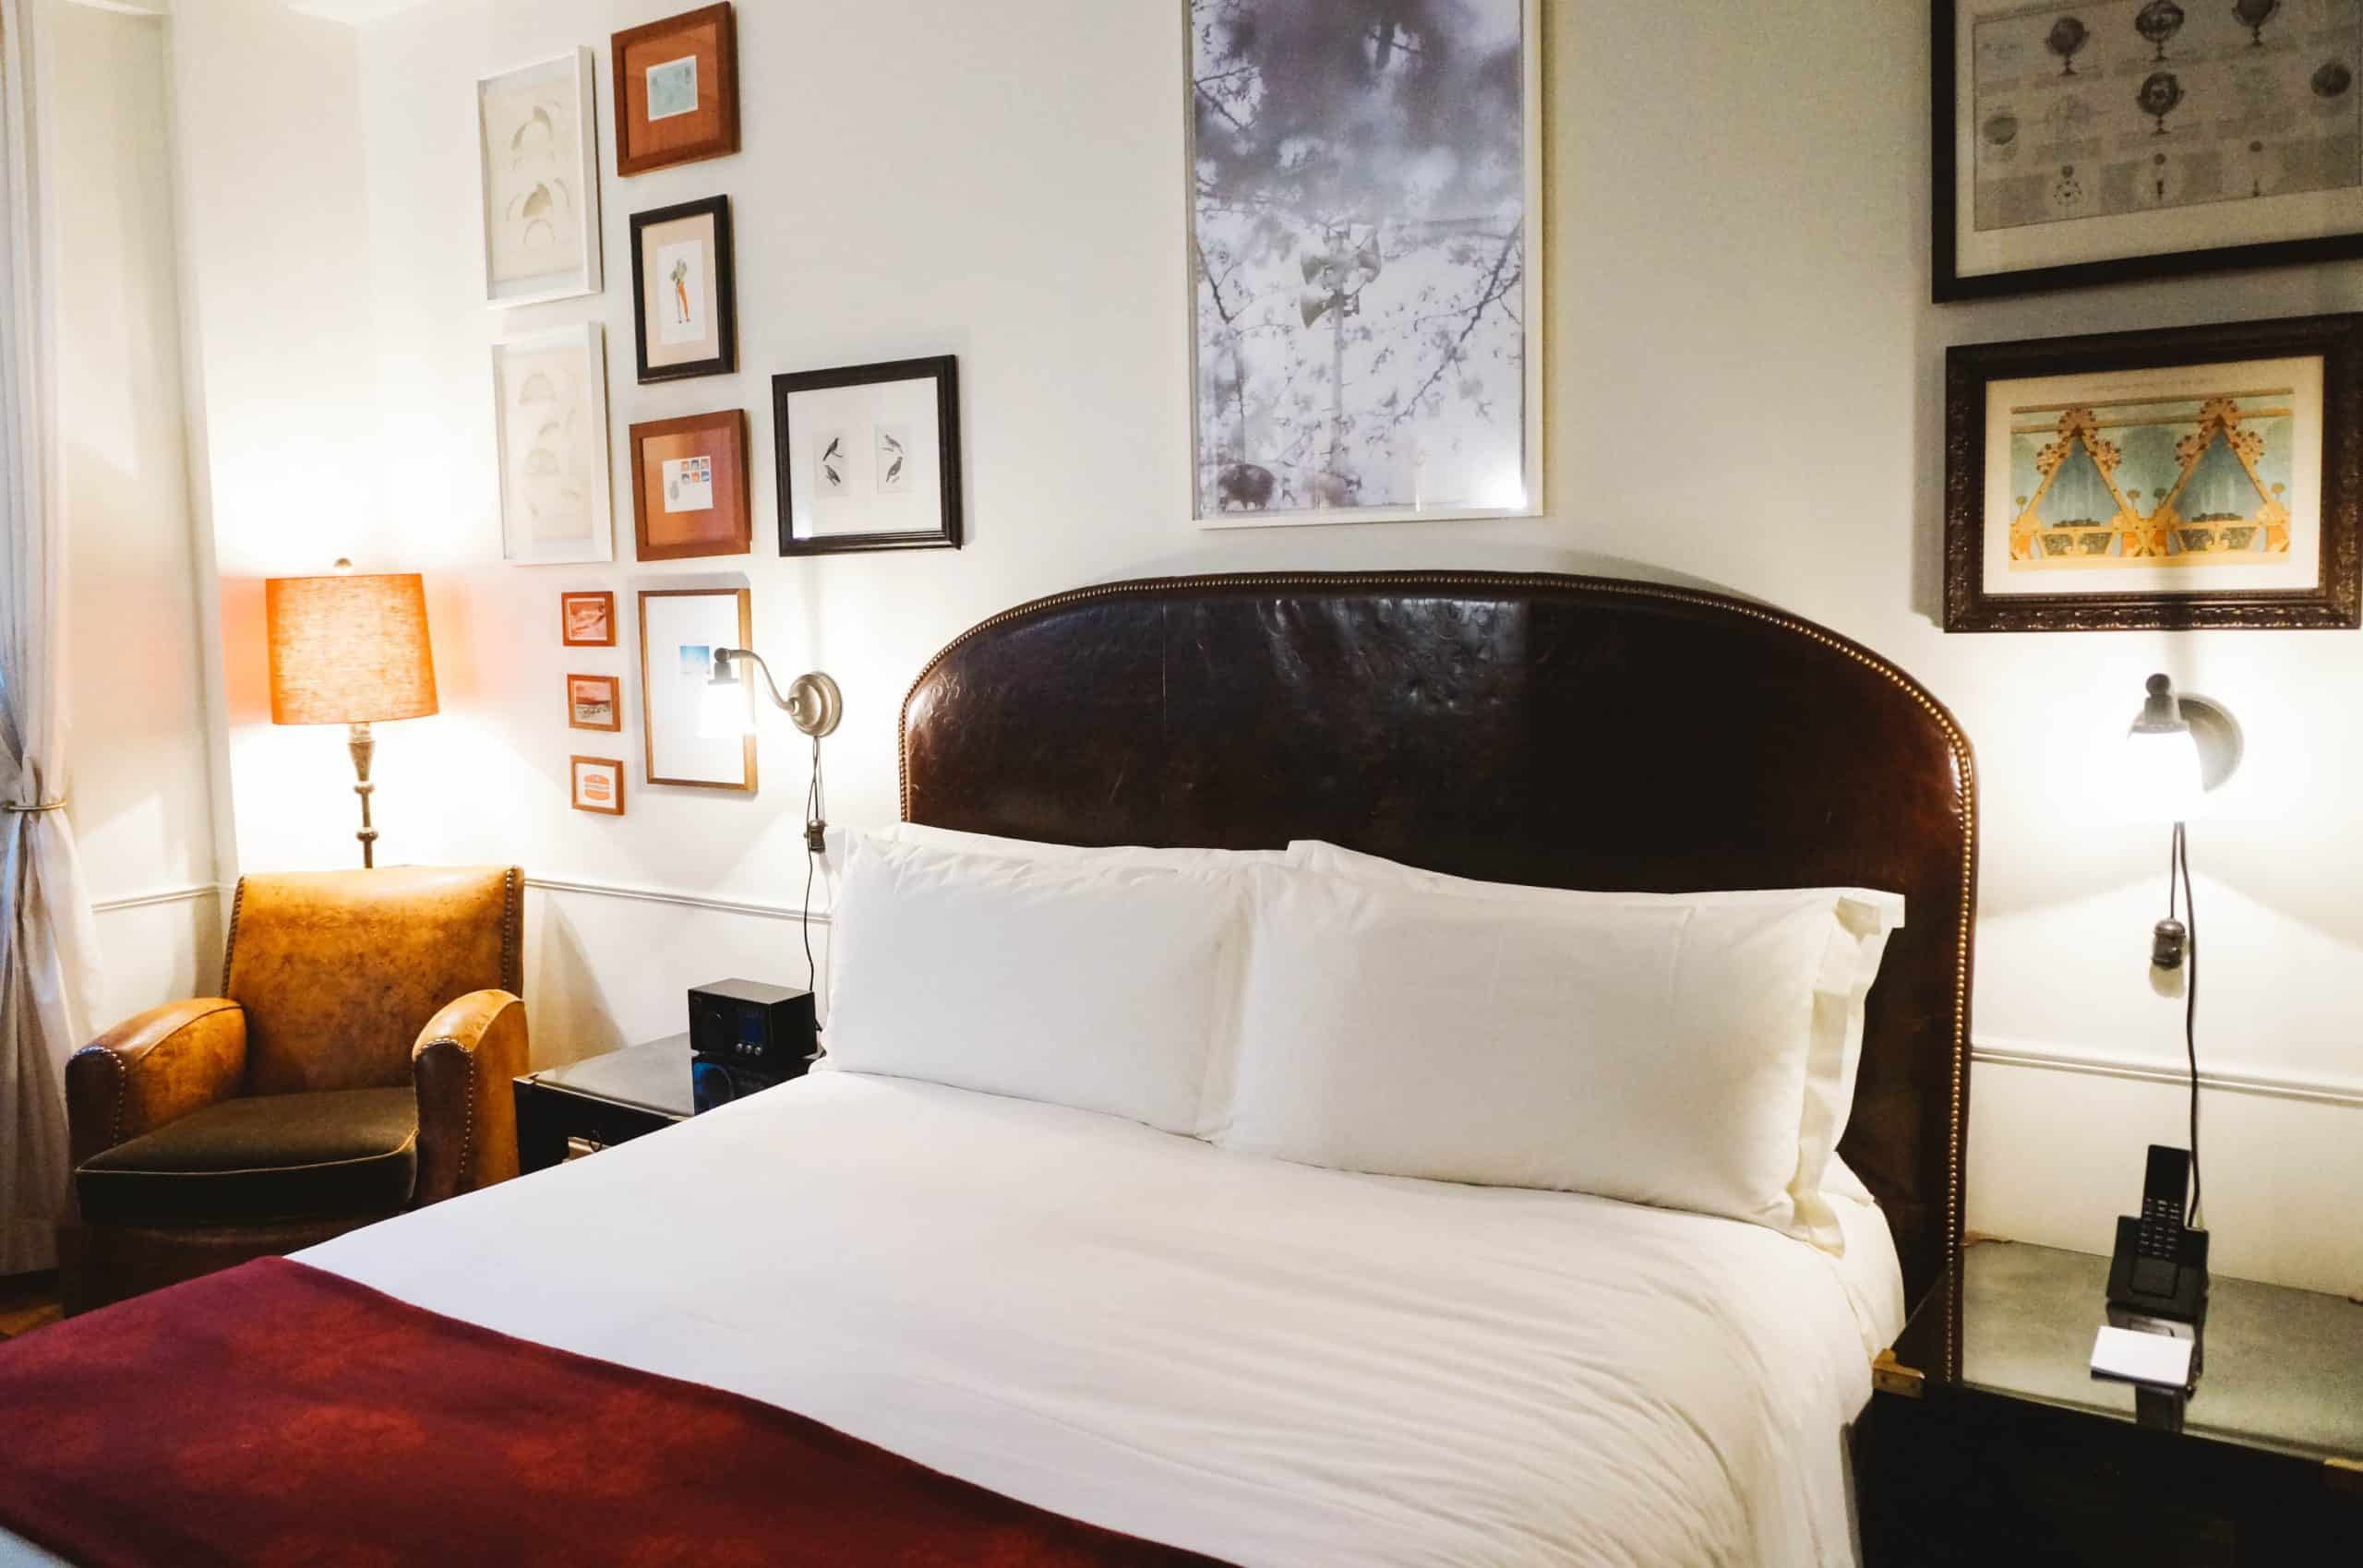 A review of the NoMad Hotel NYC a luxury boutique hotel in NYC. Located near Madison Square Park, find out everything you need to know before you book.